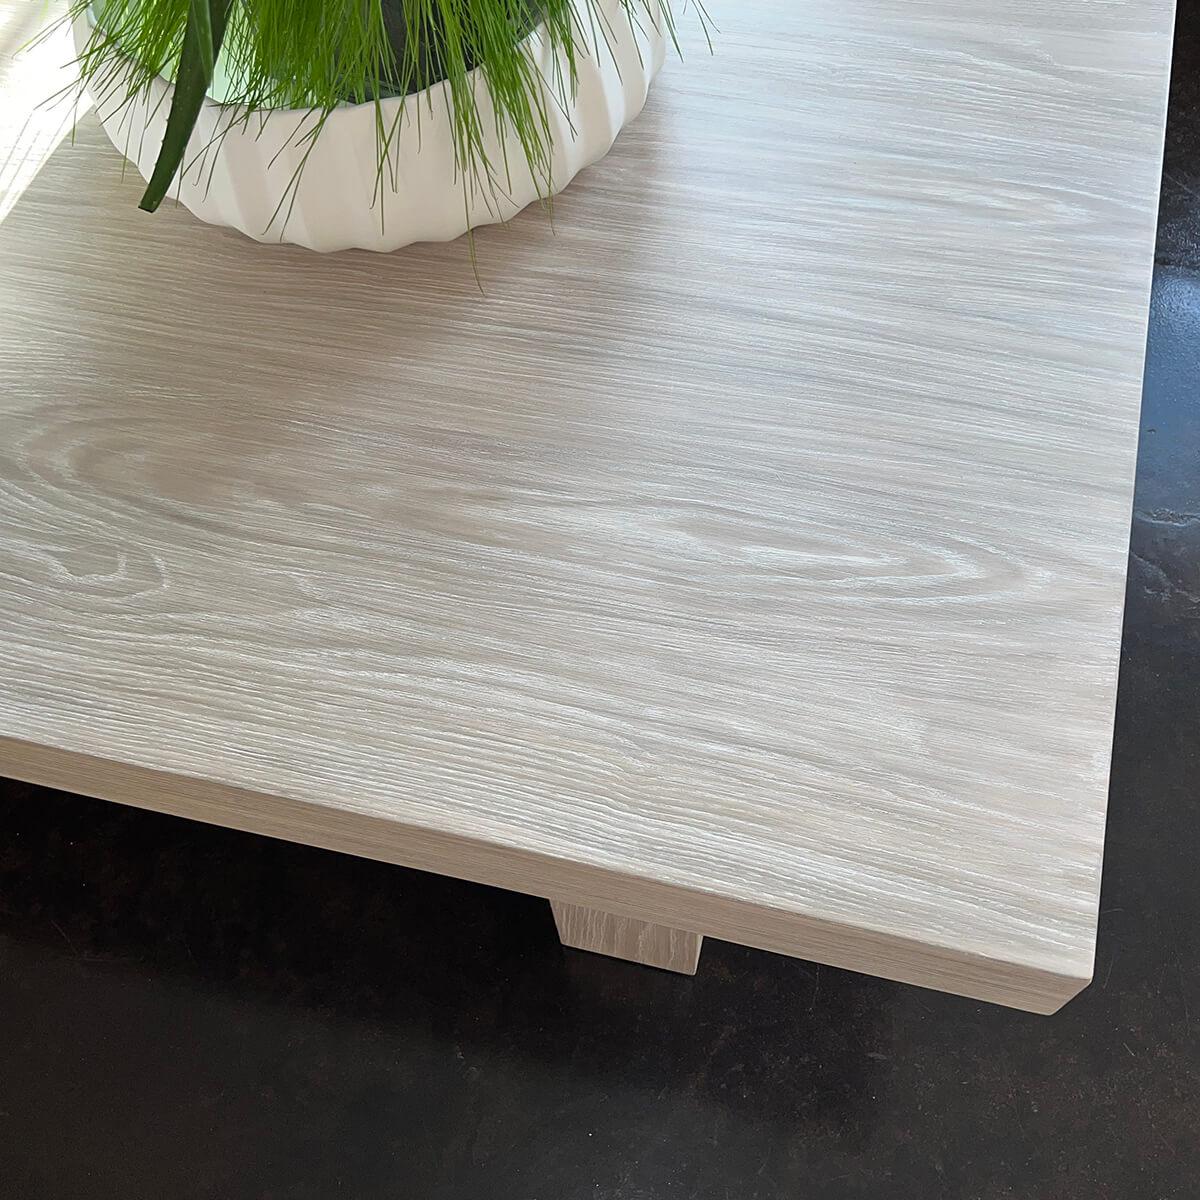 The sleek lines and whitewash ash veneer exude a sense of serenity and tranquility, while the Greek key details add a touch of classical architecture to the mix. This table is the perfect blend of simplicity and sophistication, making it a versatile